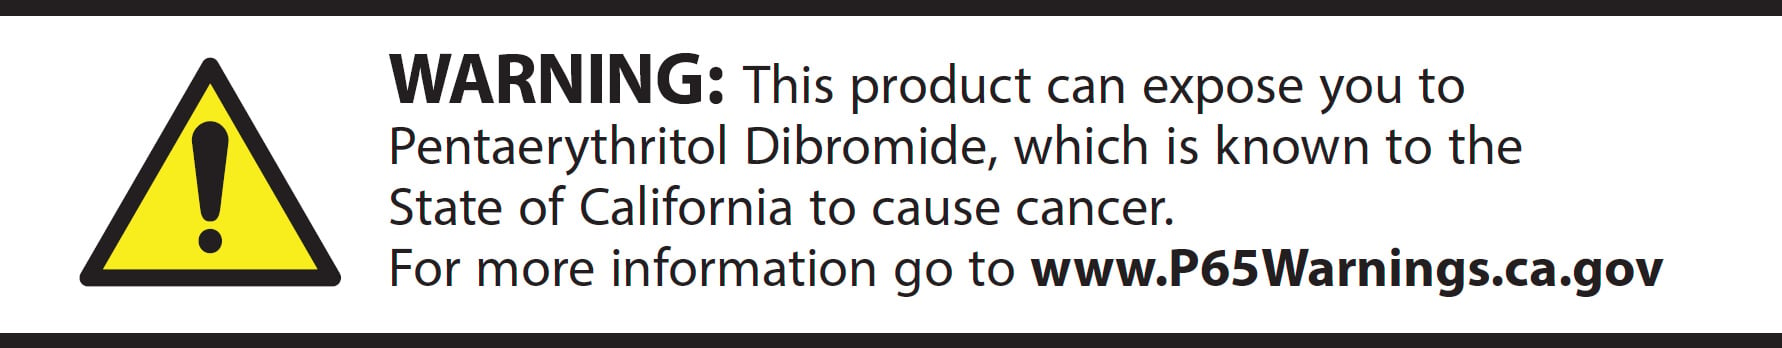 Warning: This product can expose you to Pentaerythritol Dibromide, which is known to the State of California to cause cancer.